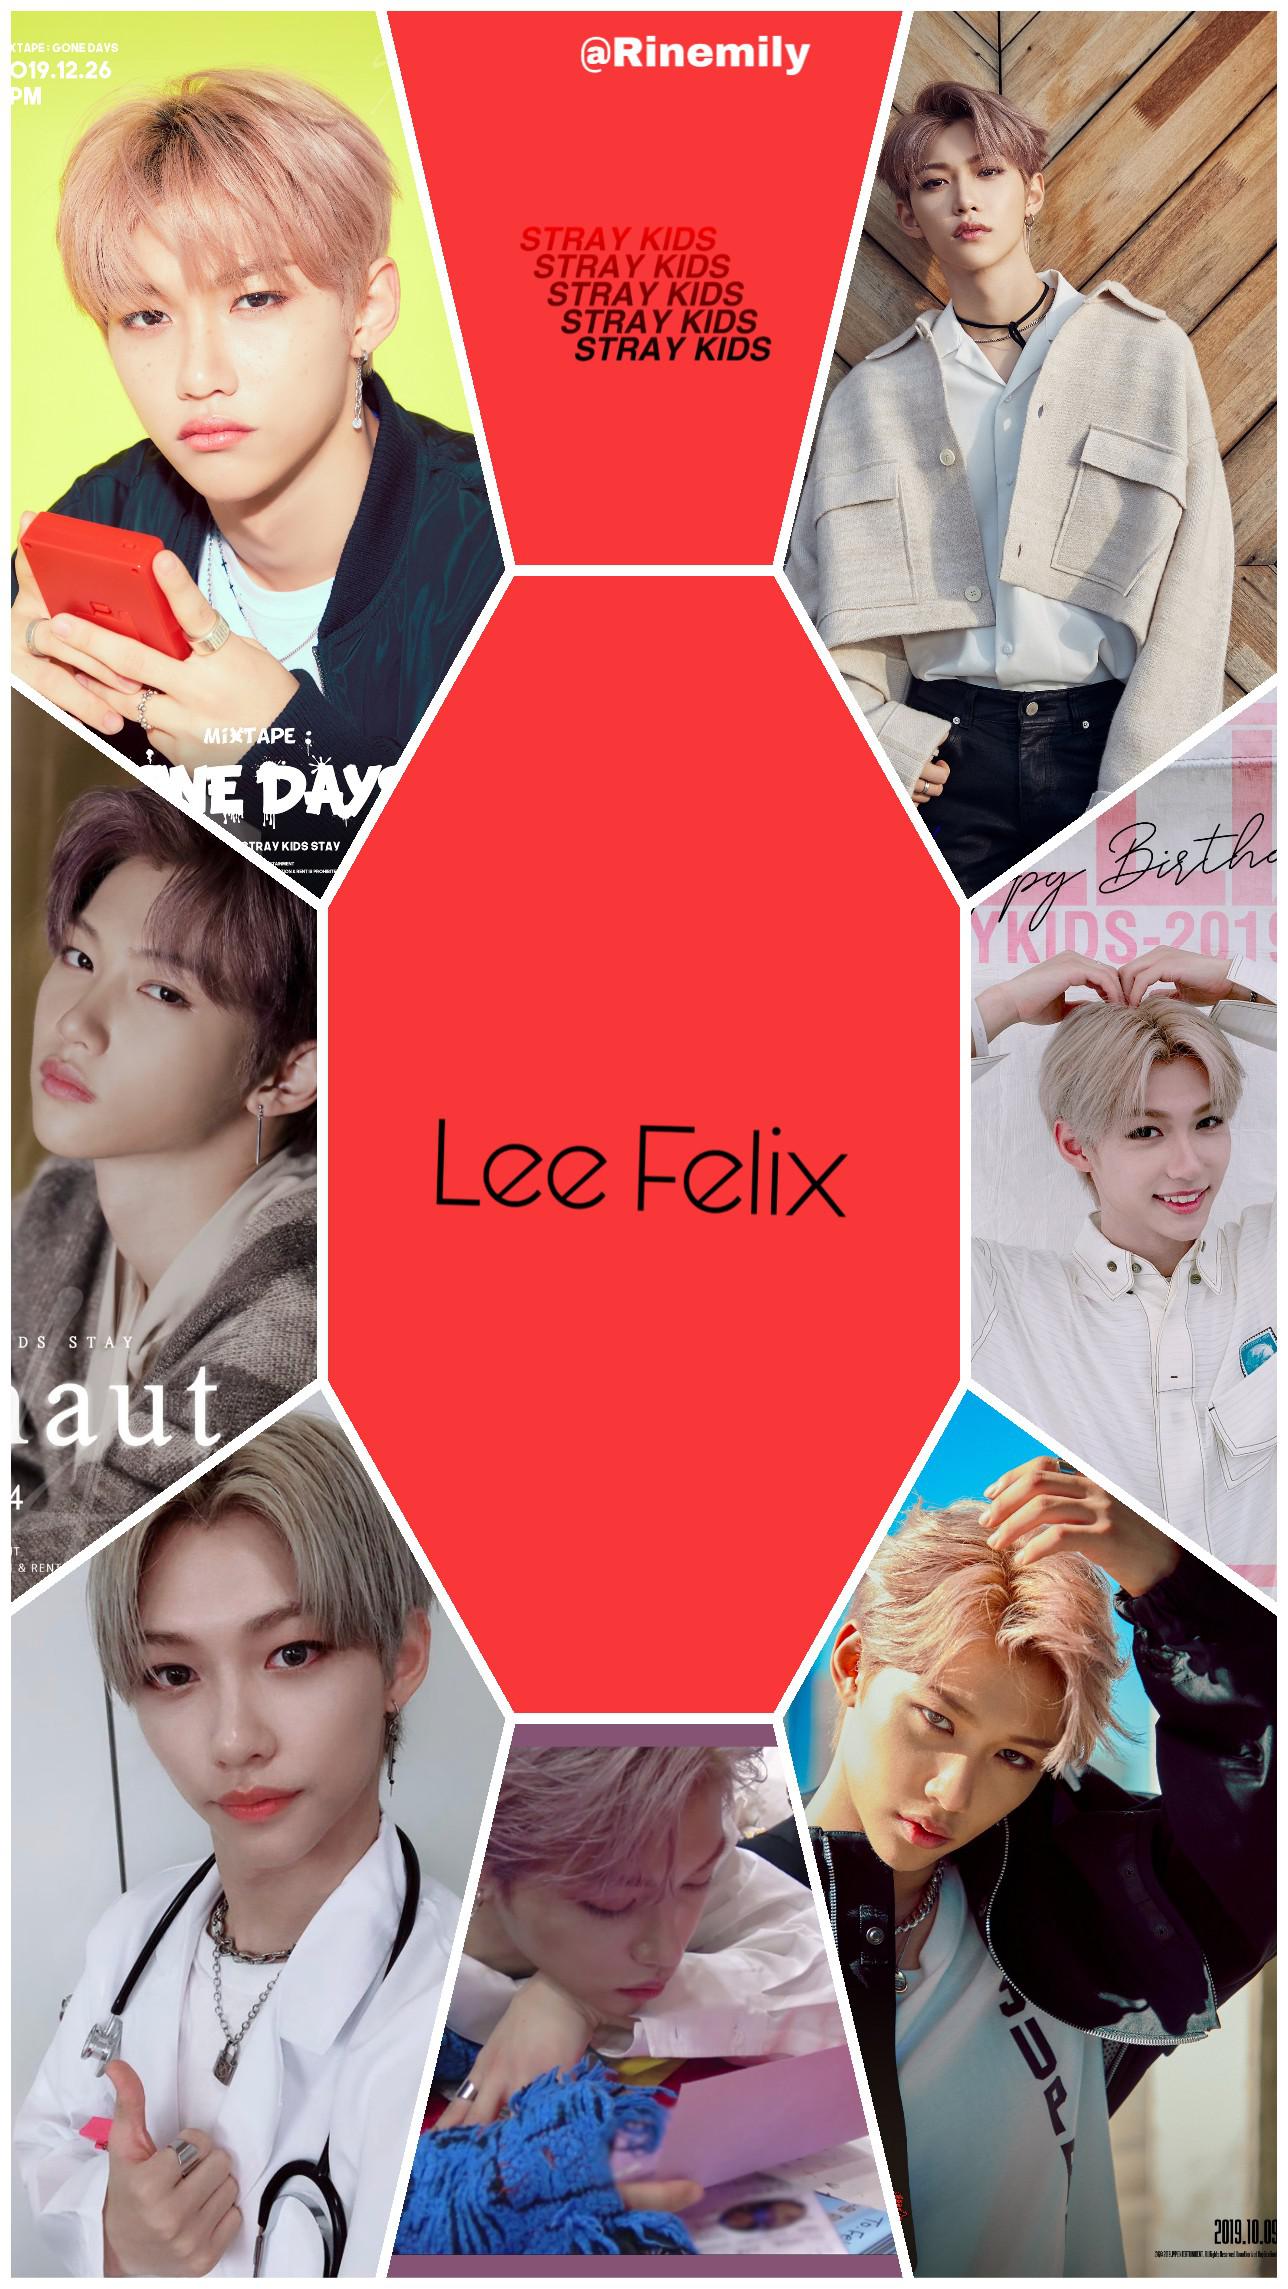 Started making Stray Kids wallpaper starting with Felix. Will make the other members soon. Feel free to use